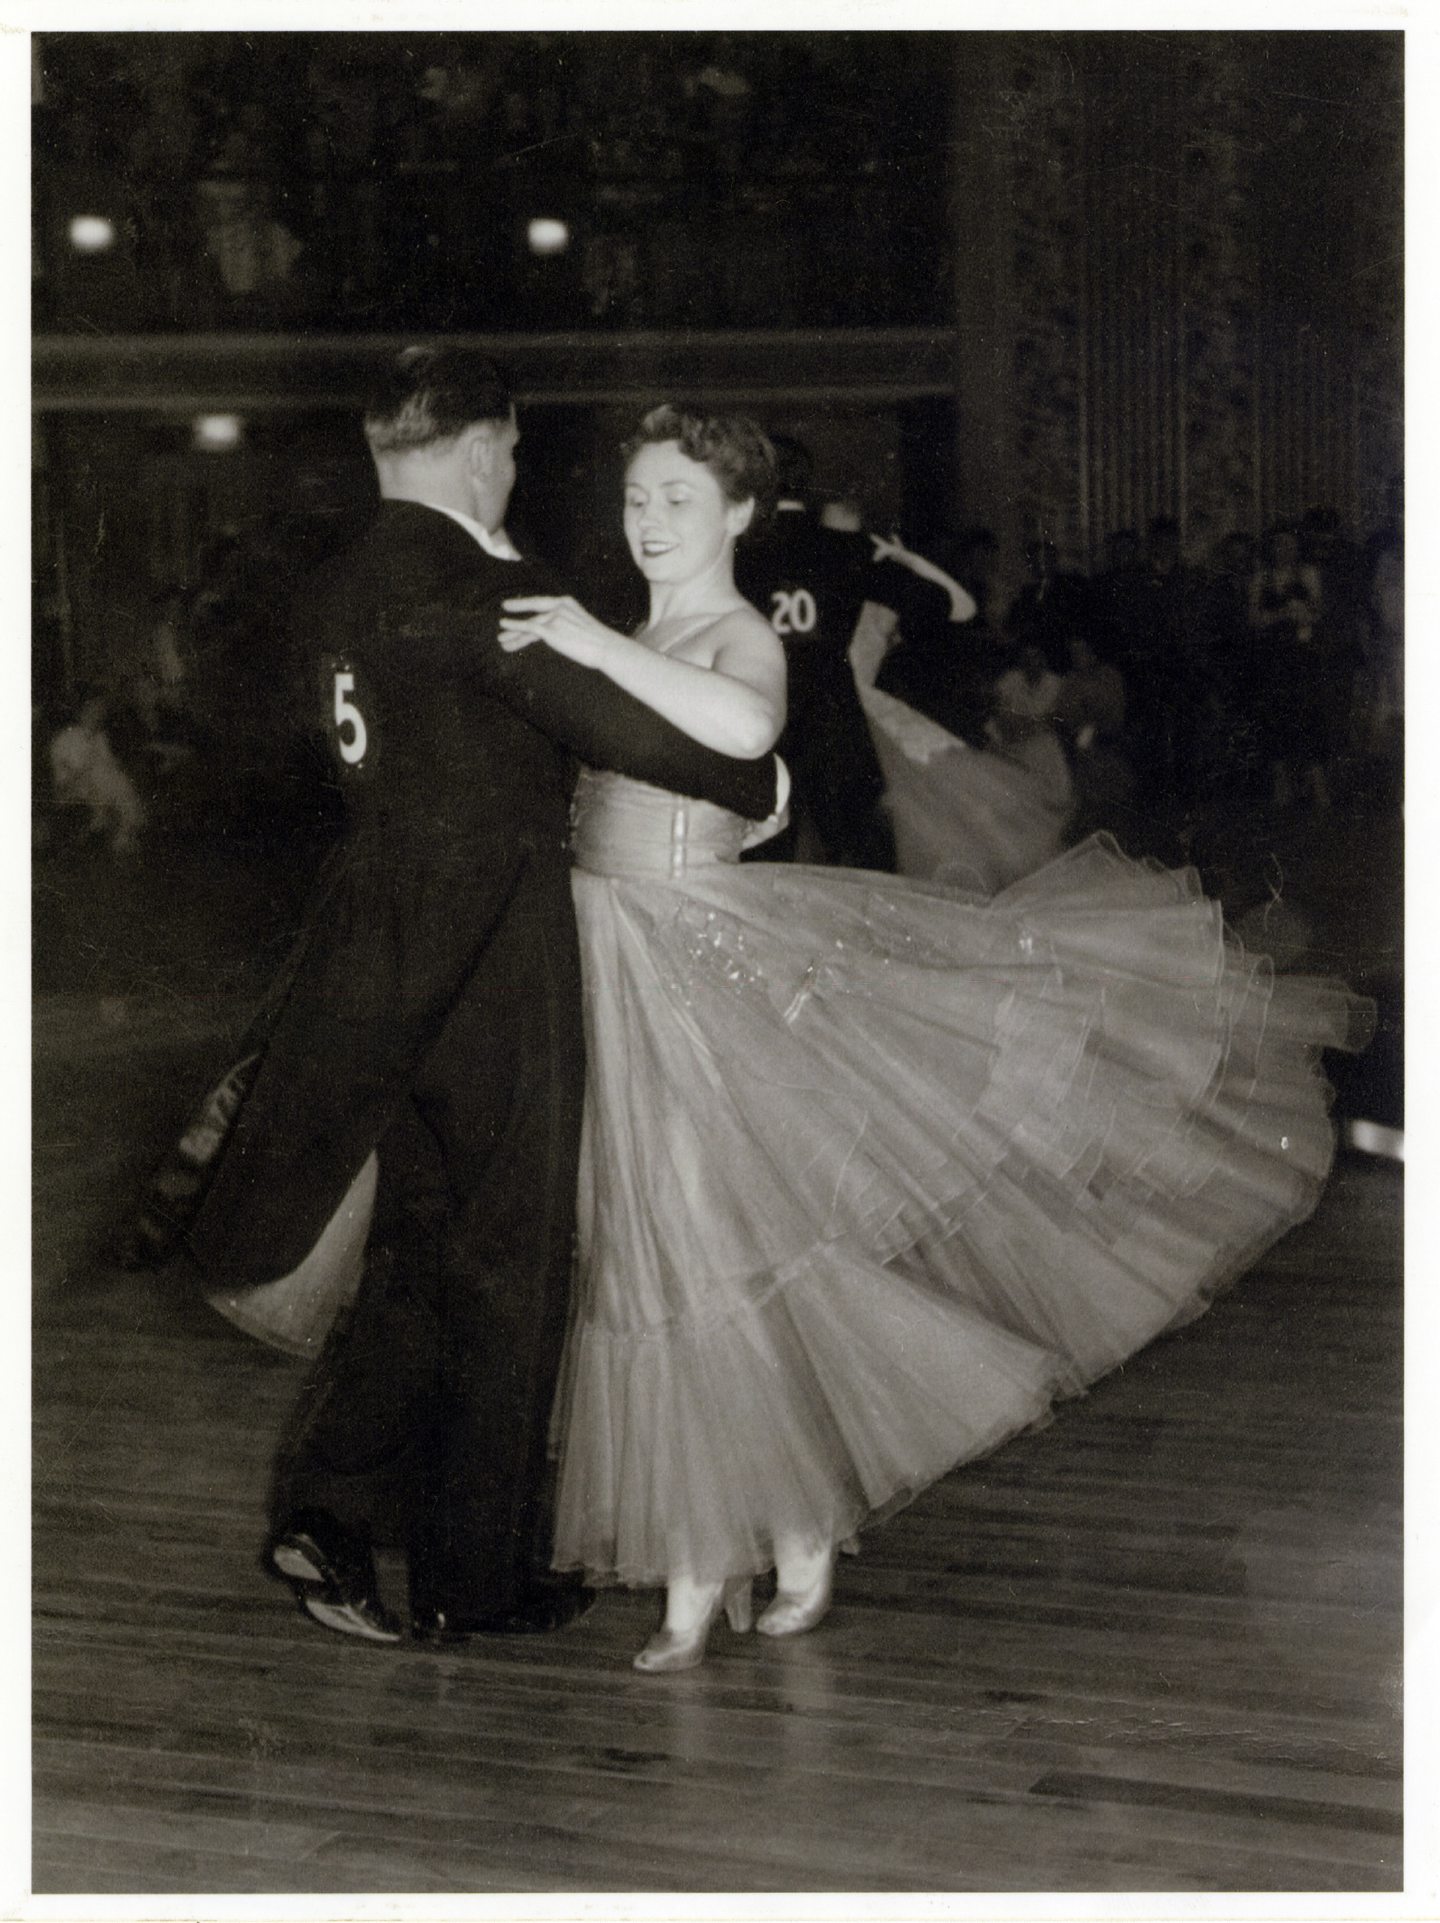 George and Jessie Fraser take part in the National Championships at the Beach Ballroom in 1955.